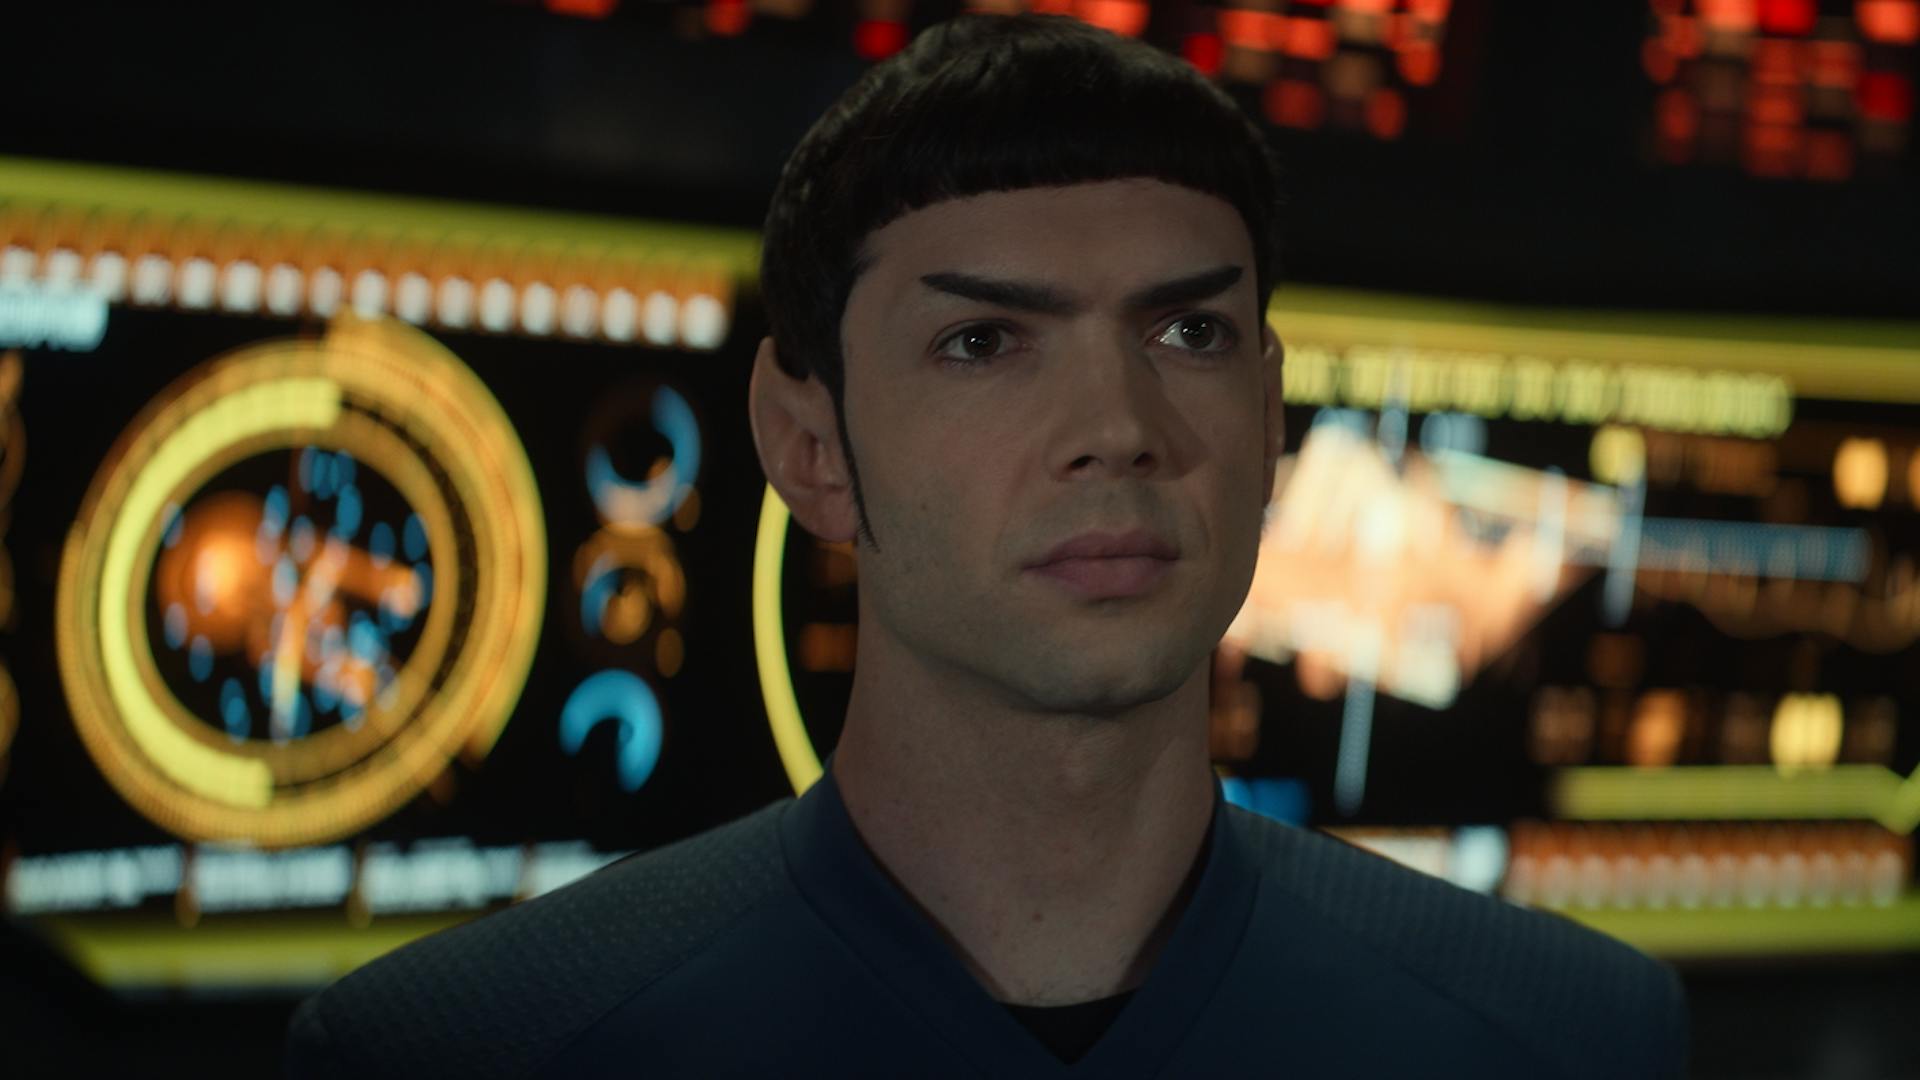 Spock (Ethan Peck) looks at the viewscreen on which the Romulan commander is displayed.